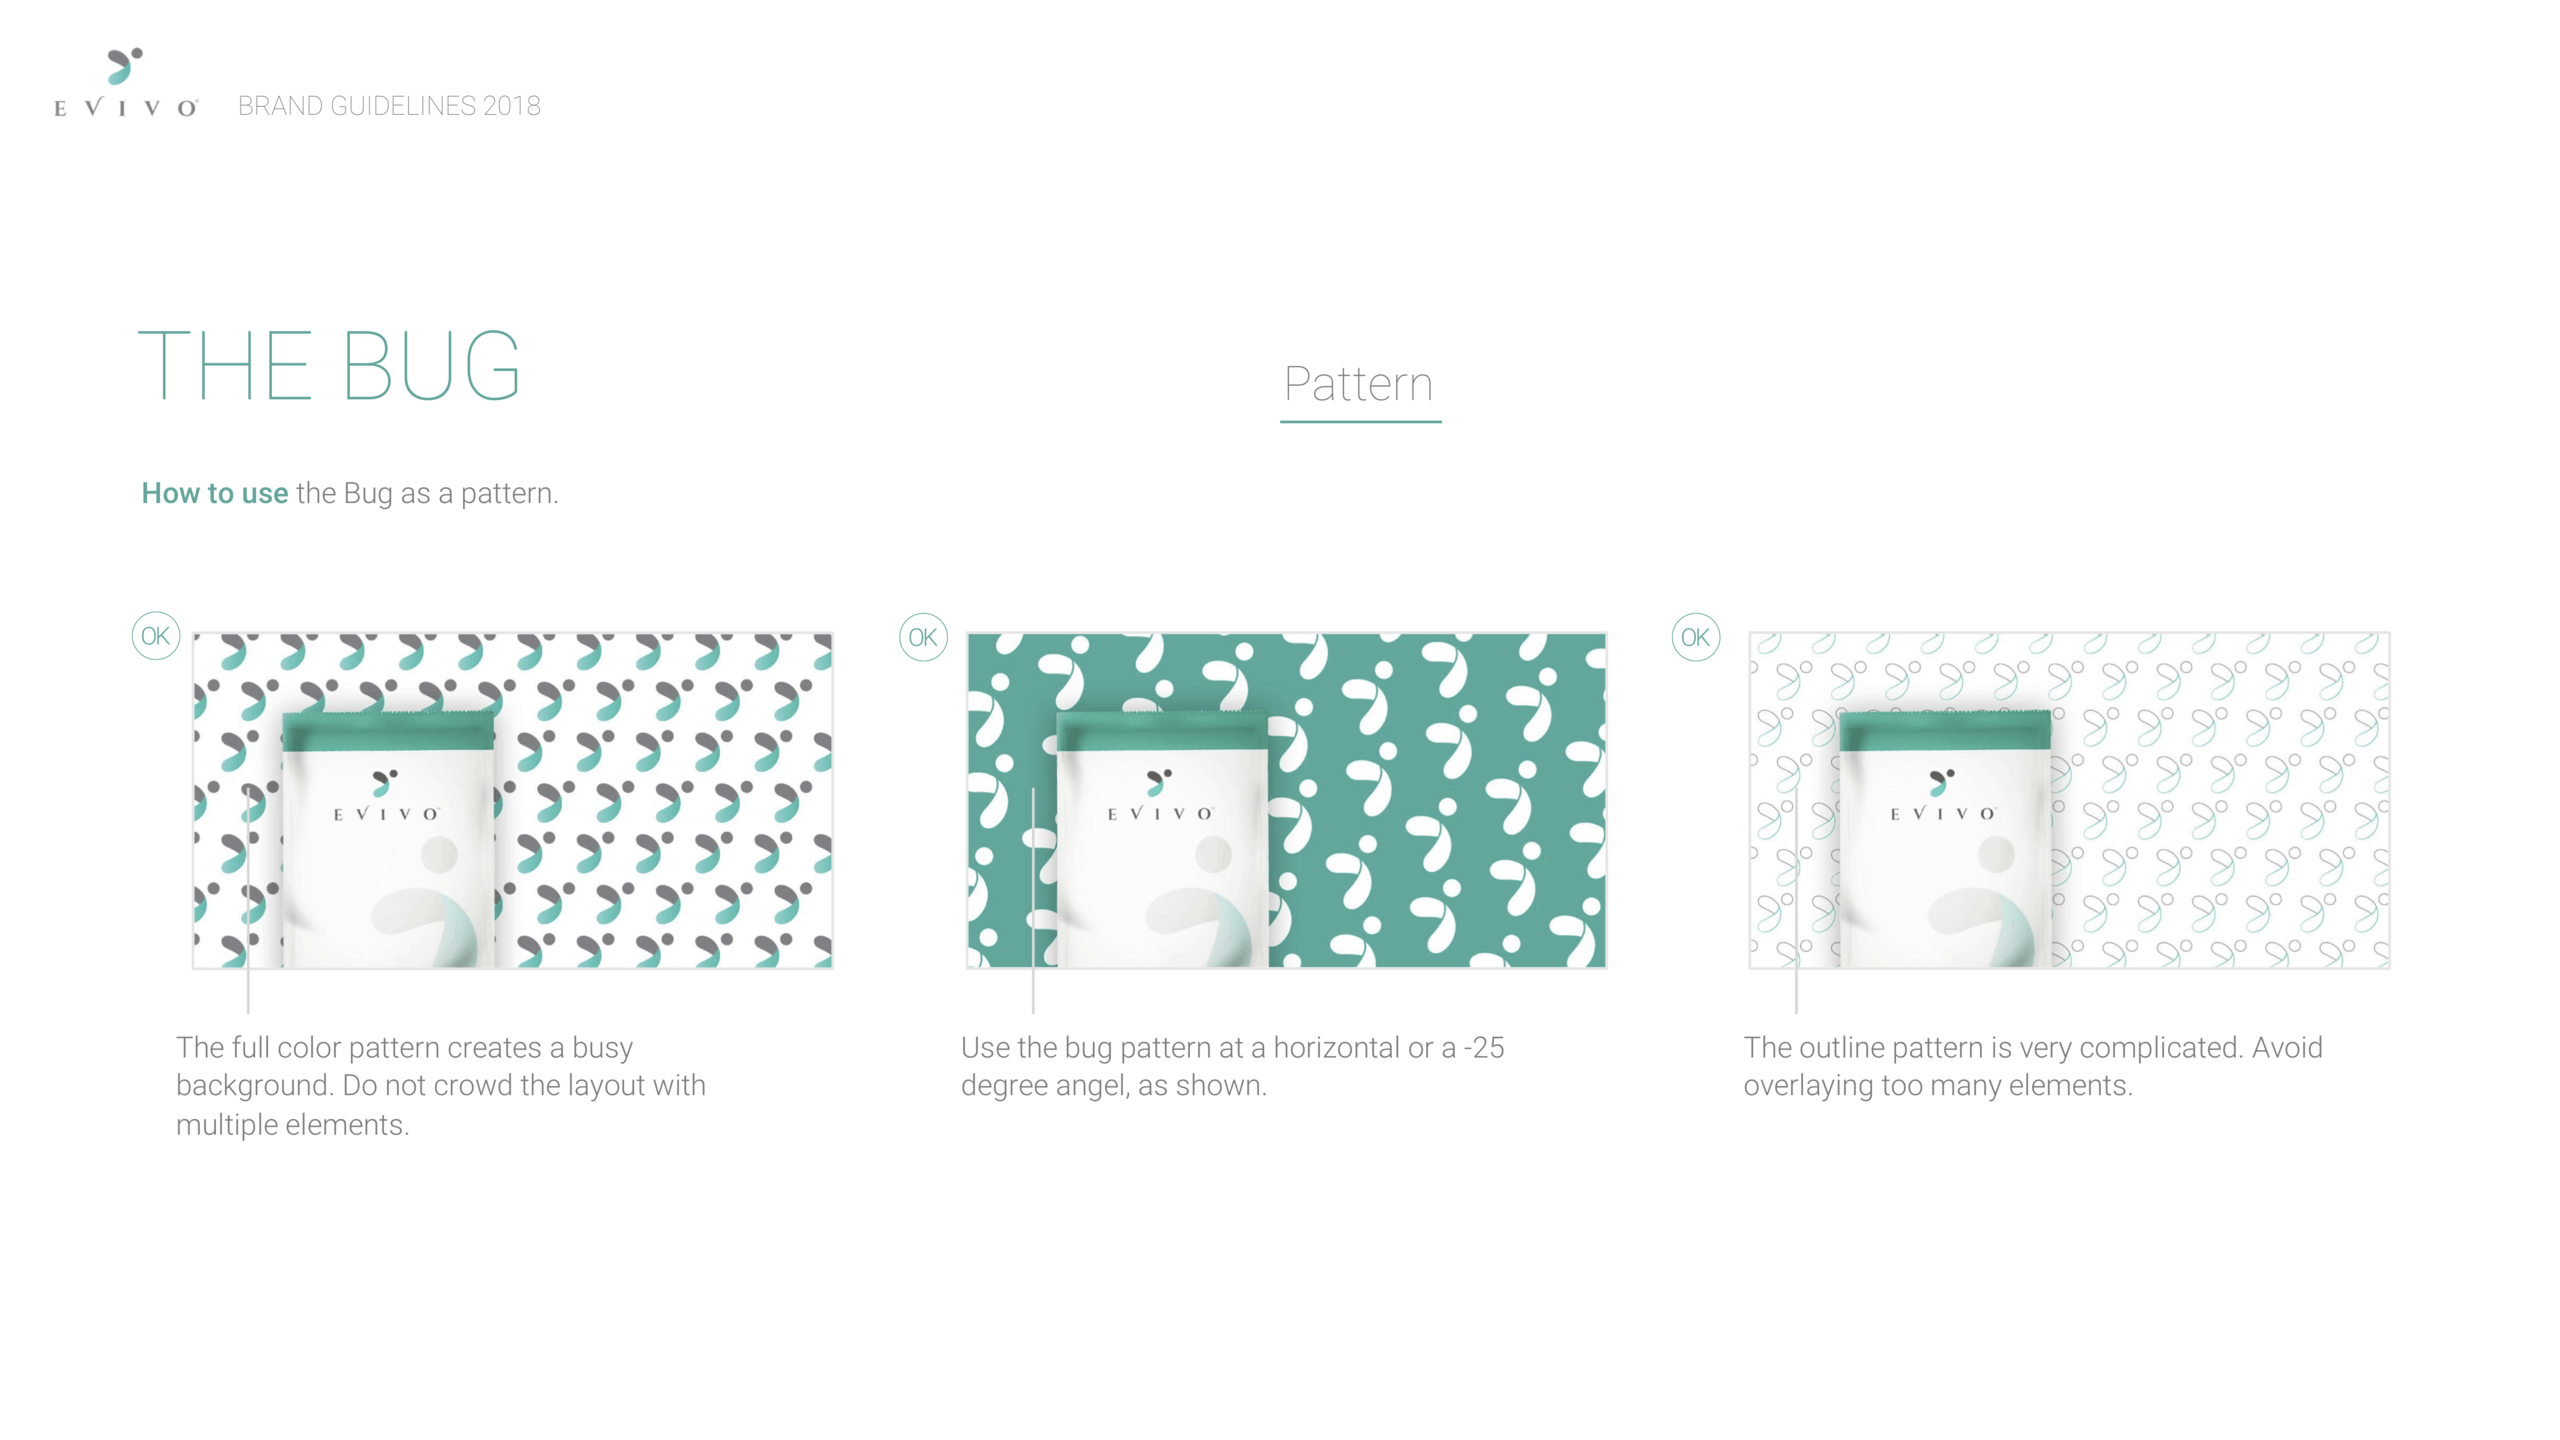 Evivo Brand Guidelines Image 3